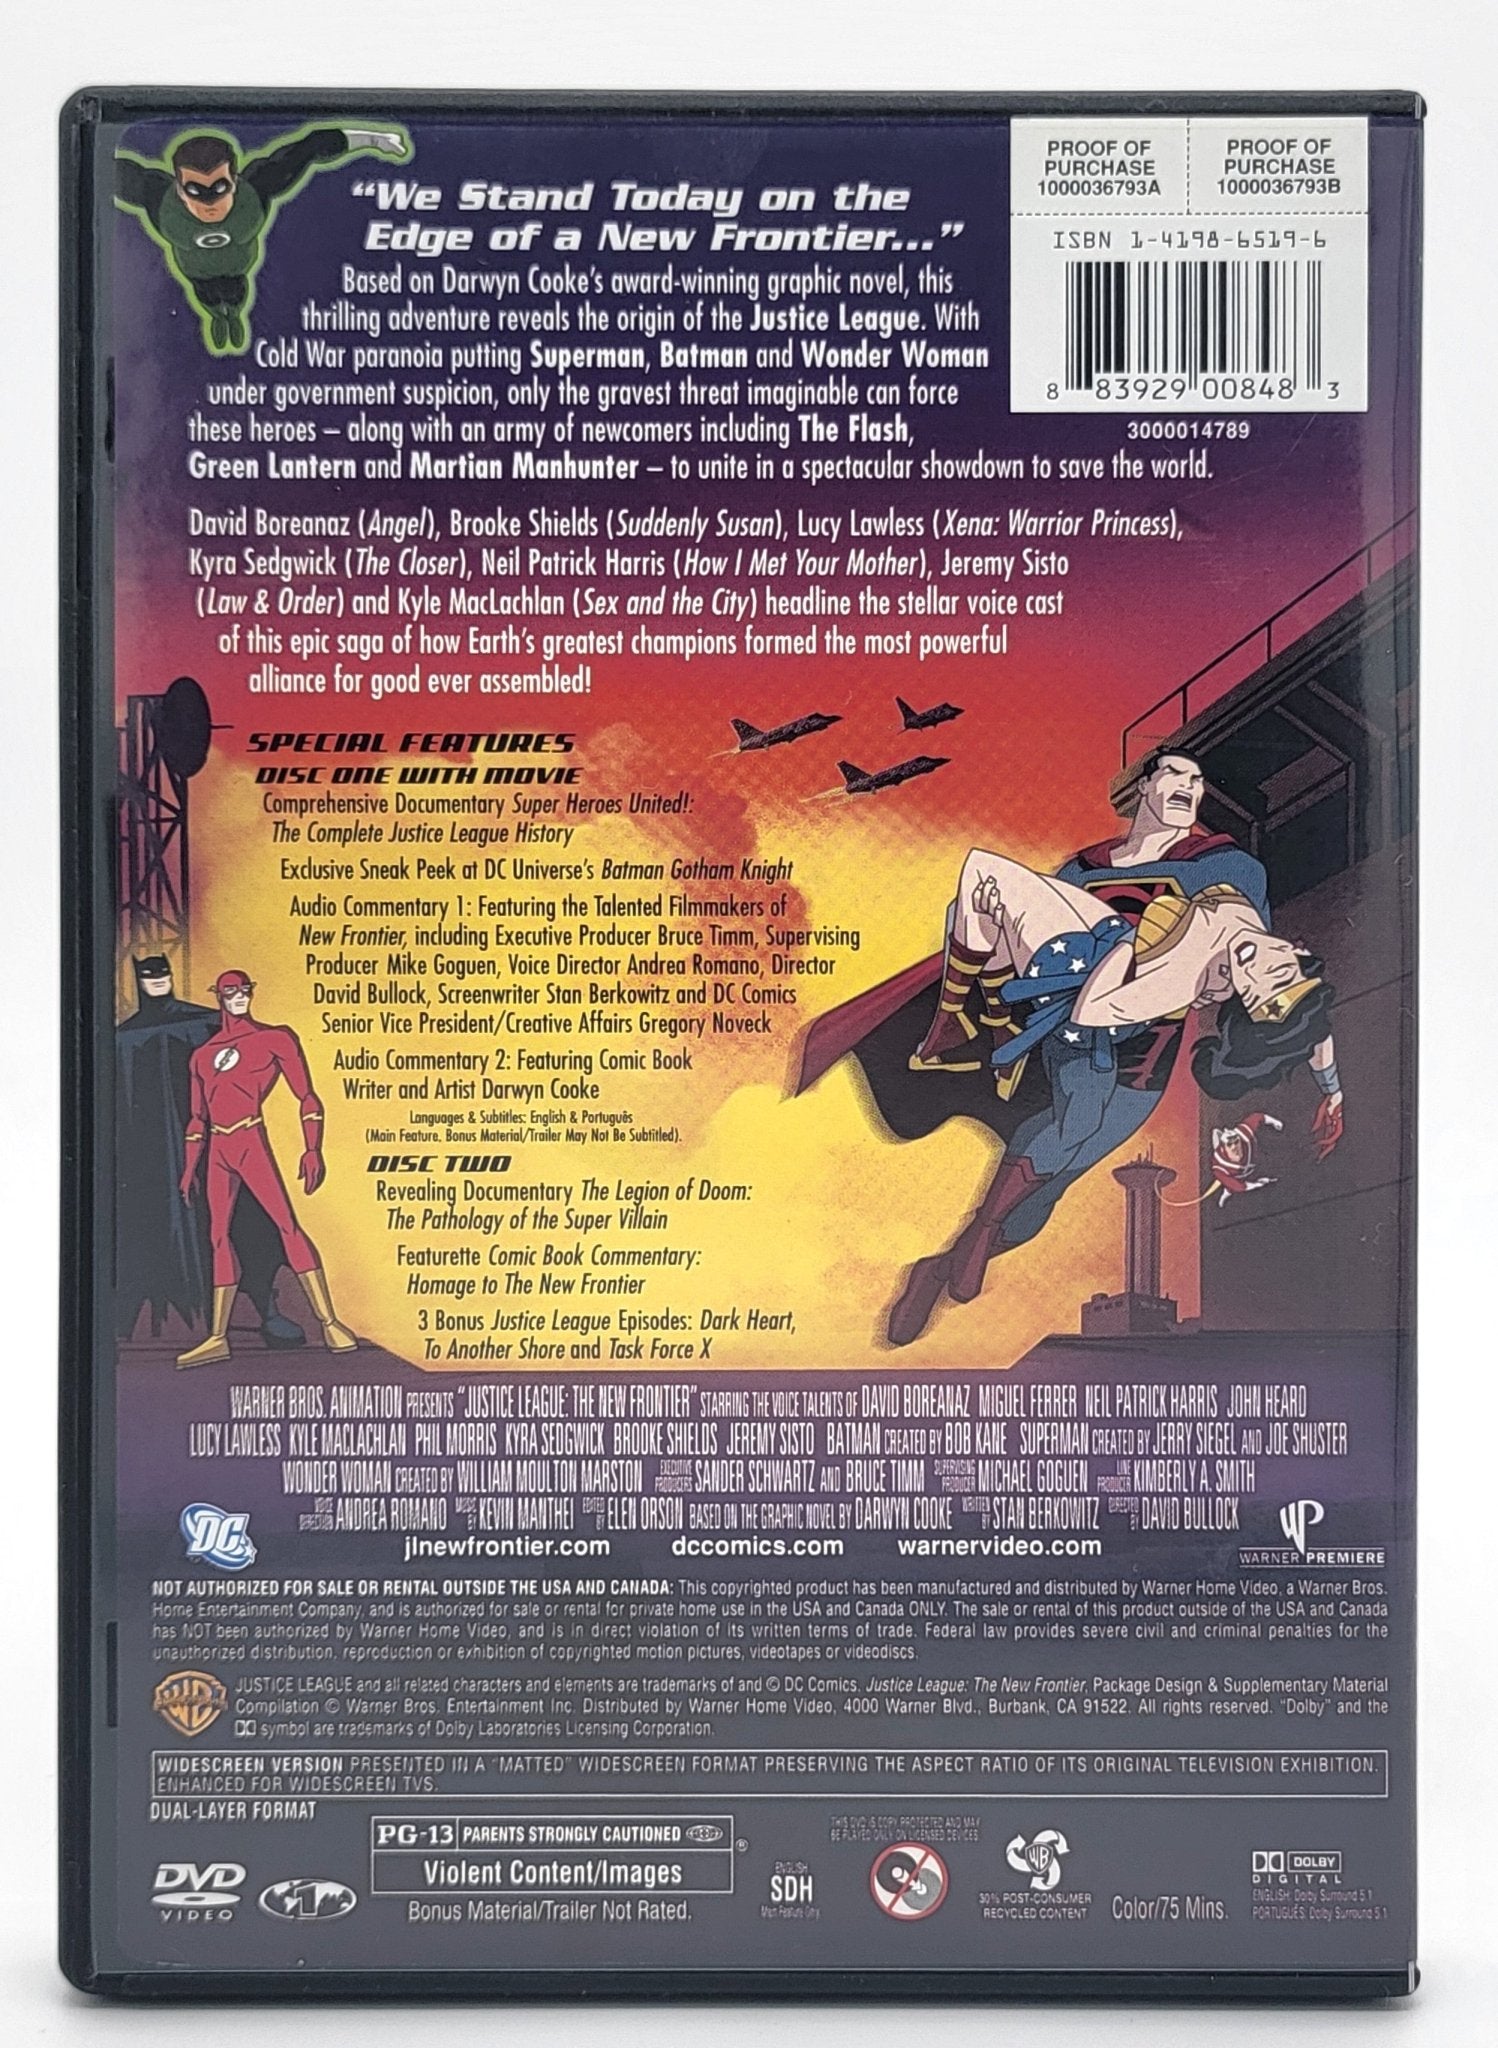 Warner Brothers - Justice League - The New Frontier | 2 Disc Special Edition | DVD | Widescreen - DVD - Steady Bunny Shop